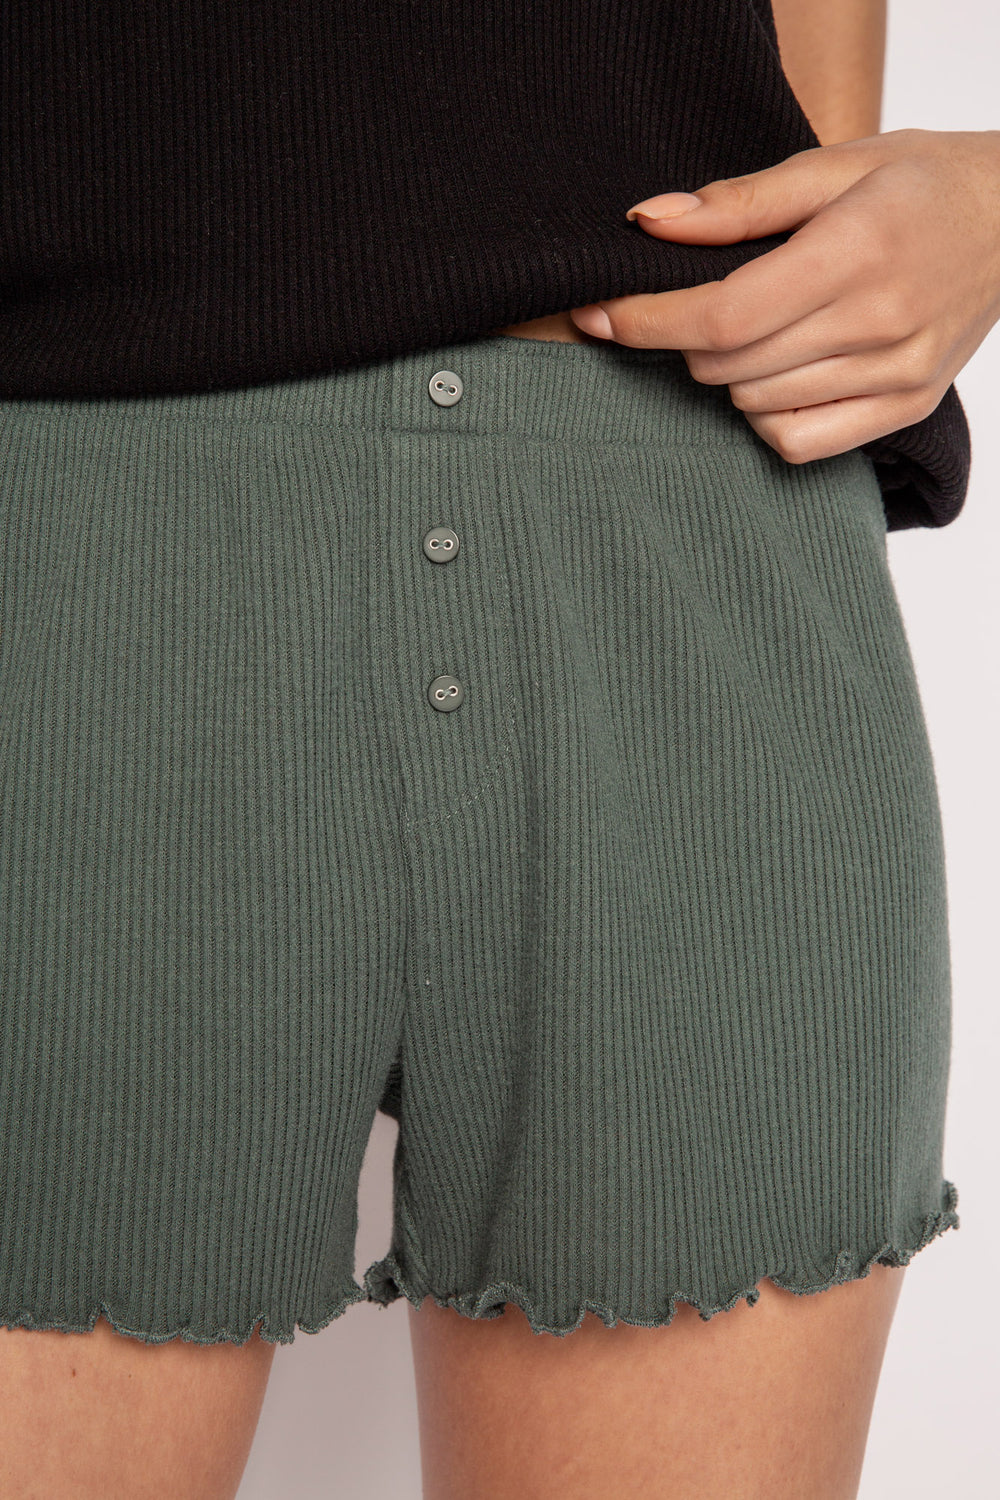 Green sleep short in 2x2 rib peachy jersey. With merrowed edge hem, and tiny faux buttons at fly. (7122612453476)